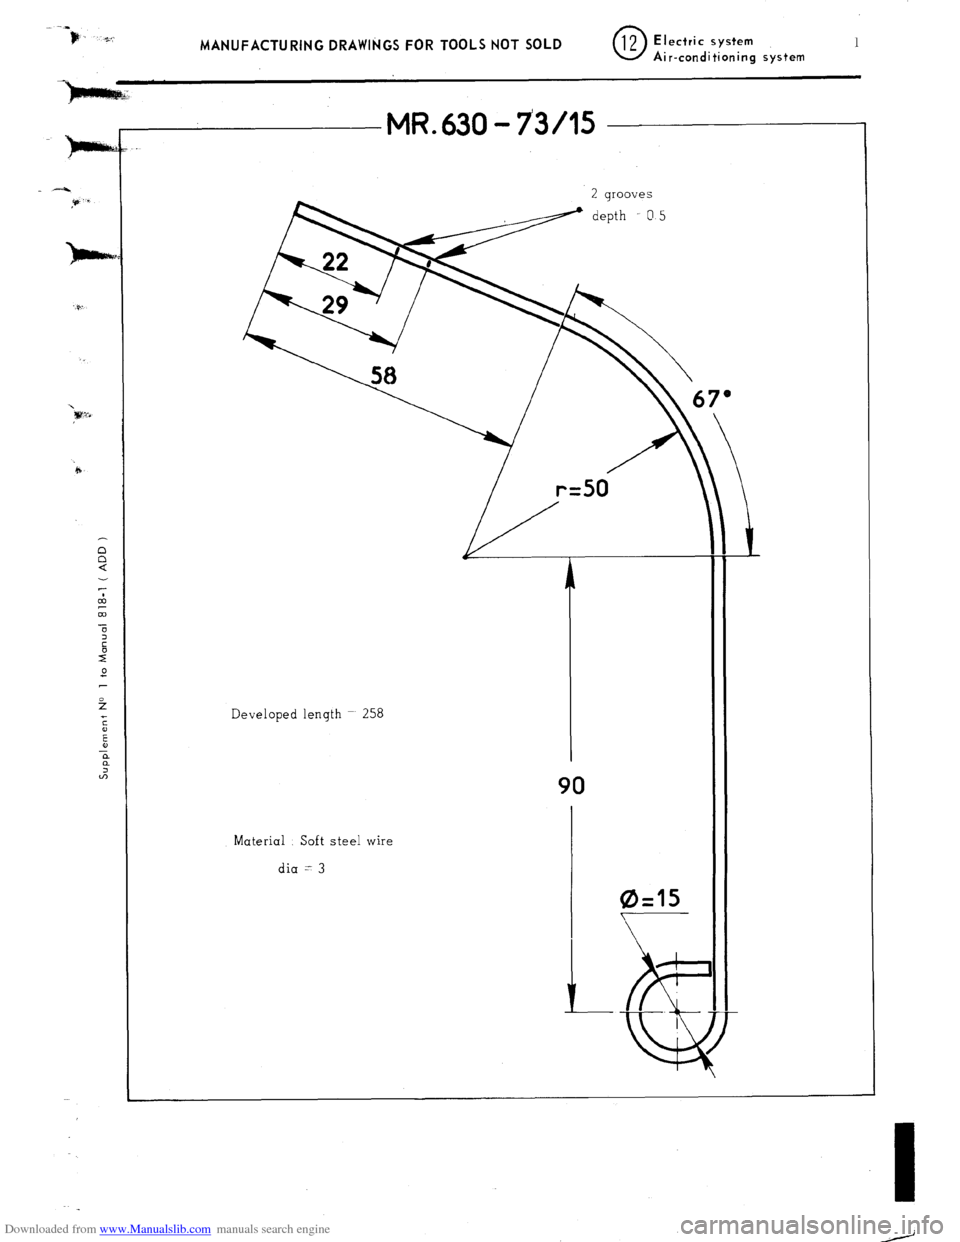 Citroen CX 1978 1.G Workshop Manual Downloaded from www.Manualslib.com manuals search engine MANUFACTURING DRAWINGS FOR TOOLS NOT SOLD 0 12 Electric system 1 Air-conditioning system n 
n 
a 
MR. 630 - 7305 
Developed length ~ 258 
Mater